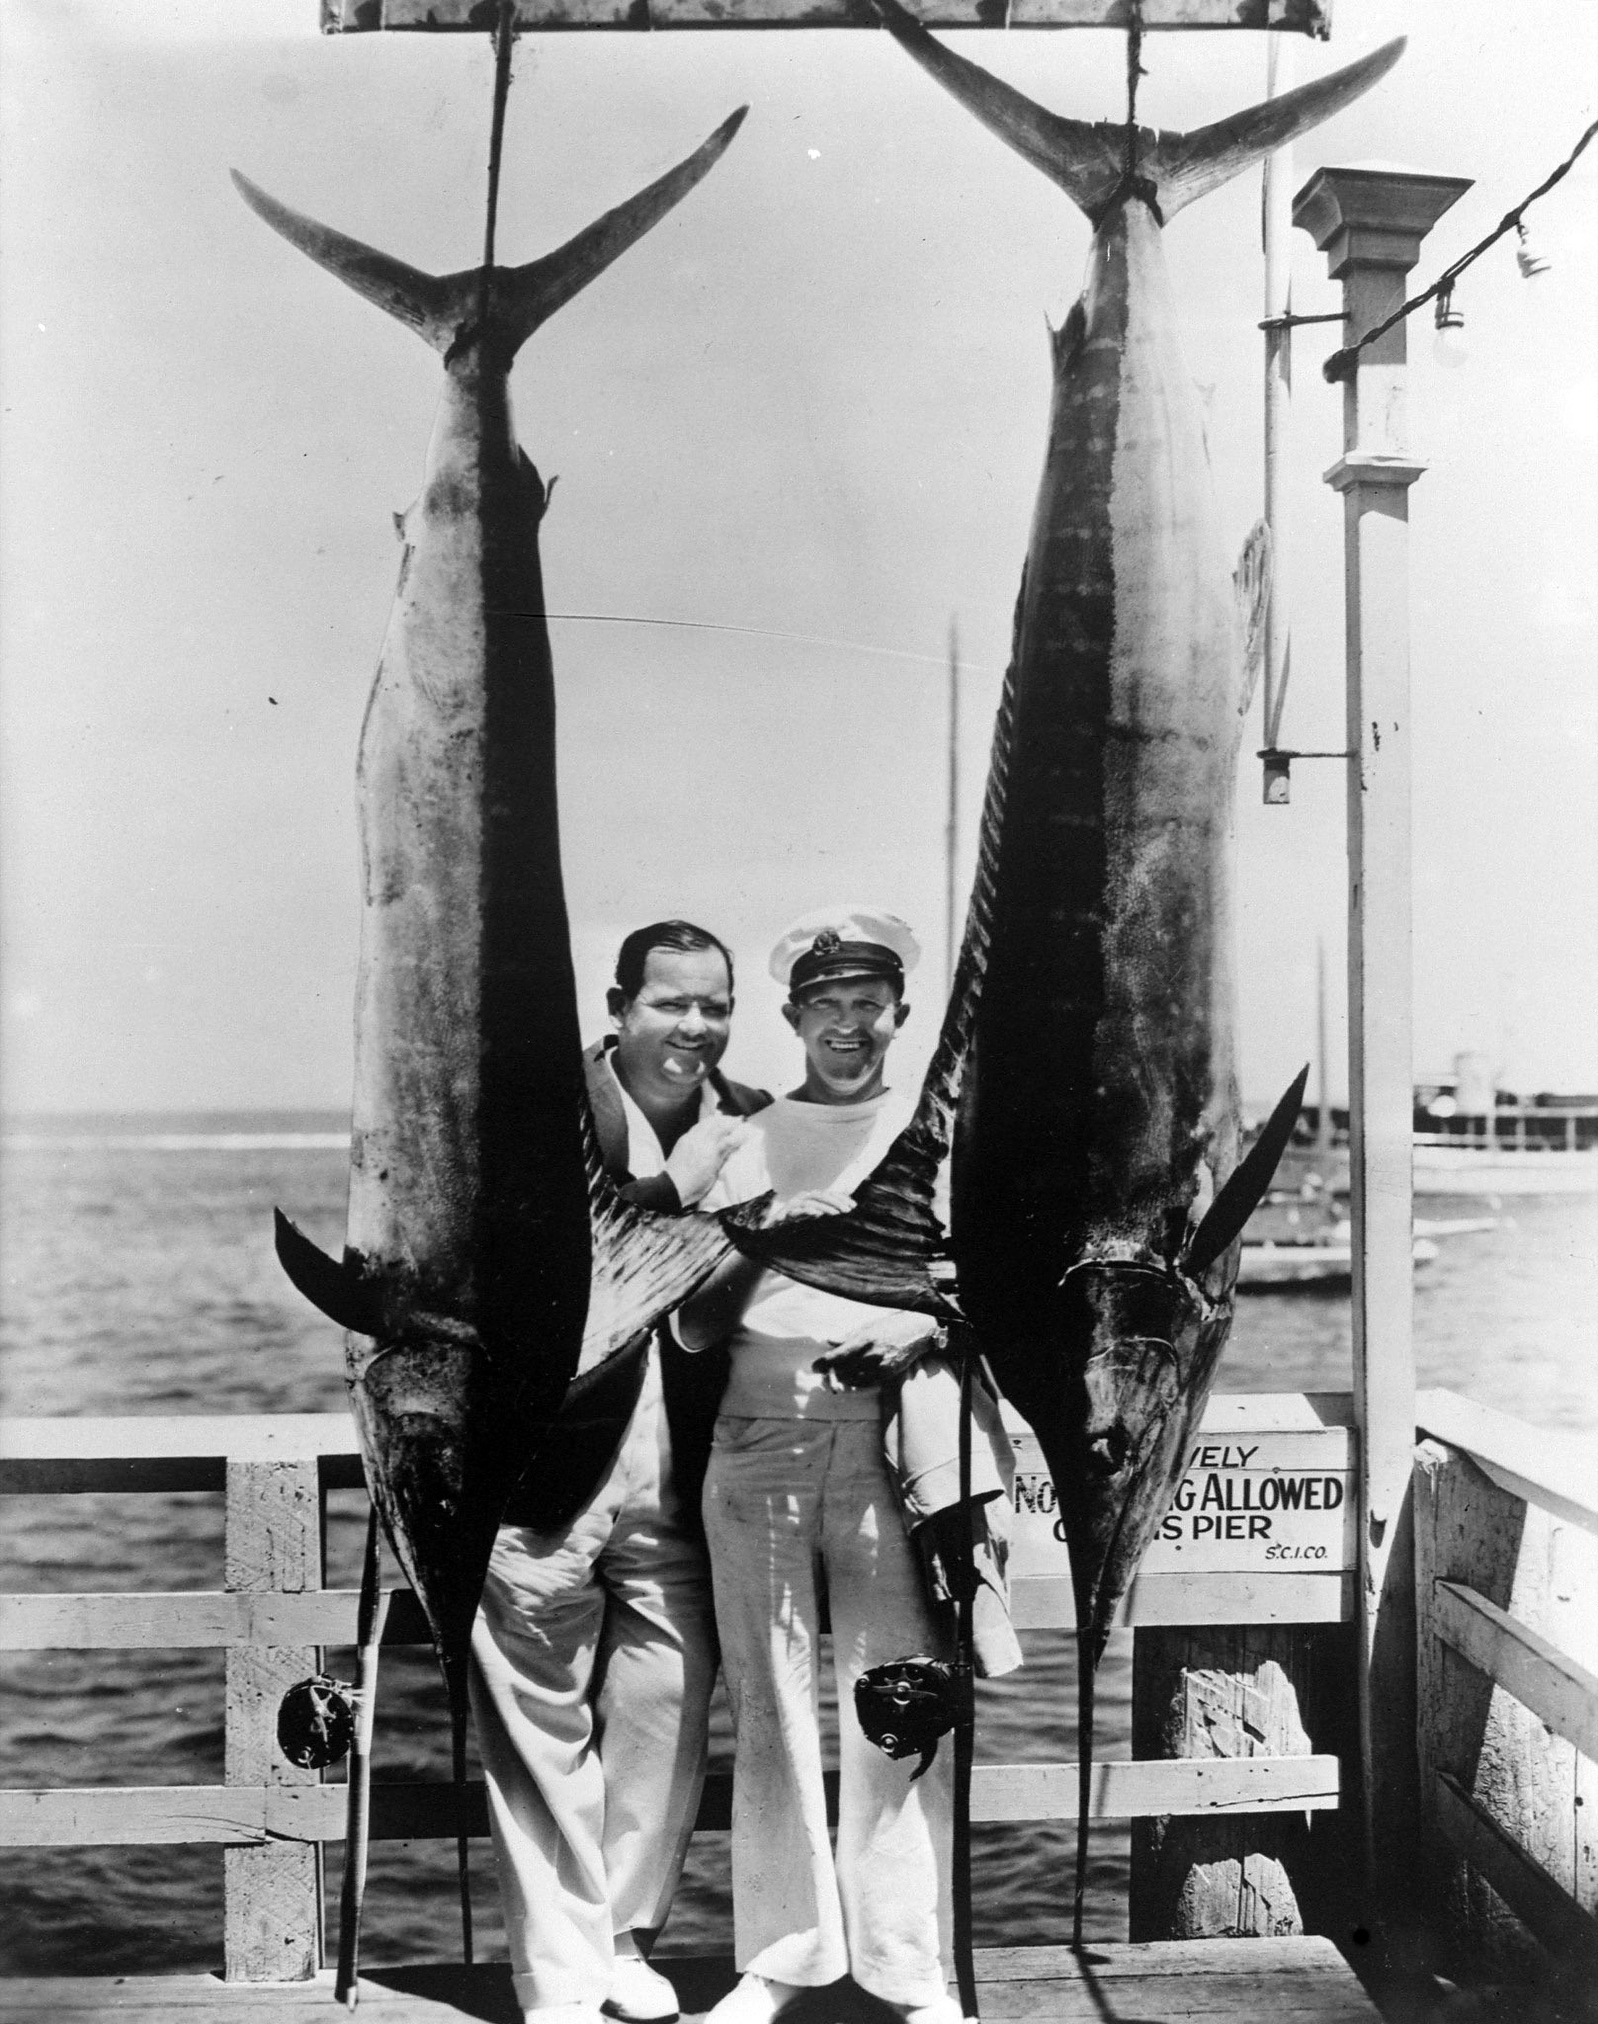 Comedy stars Oliver Hardy and on right Stan Laurel with Marlin they have caught while big game fishing, circa 1930.